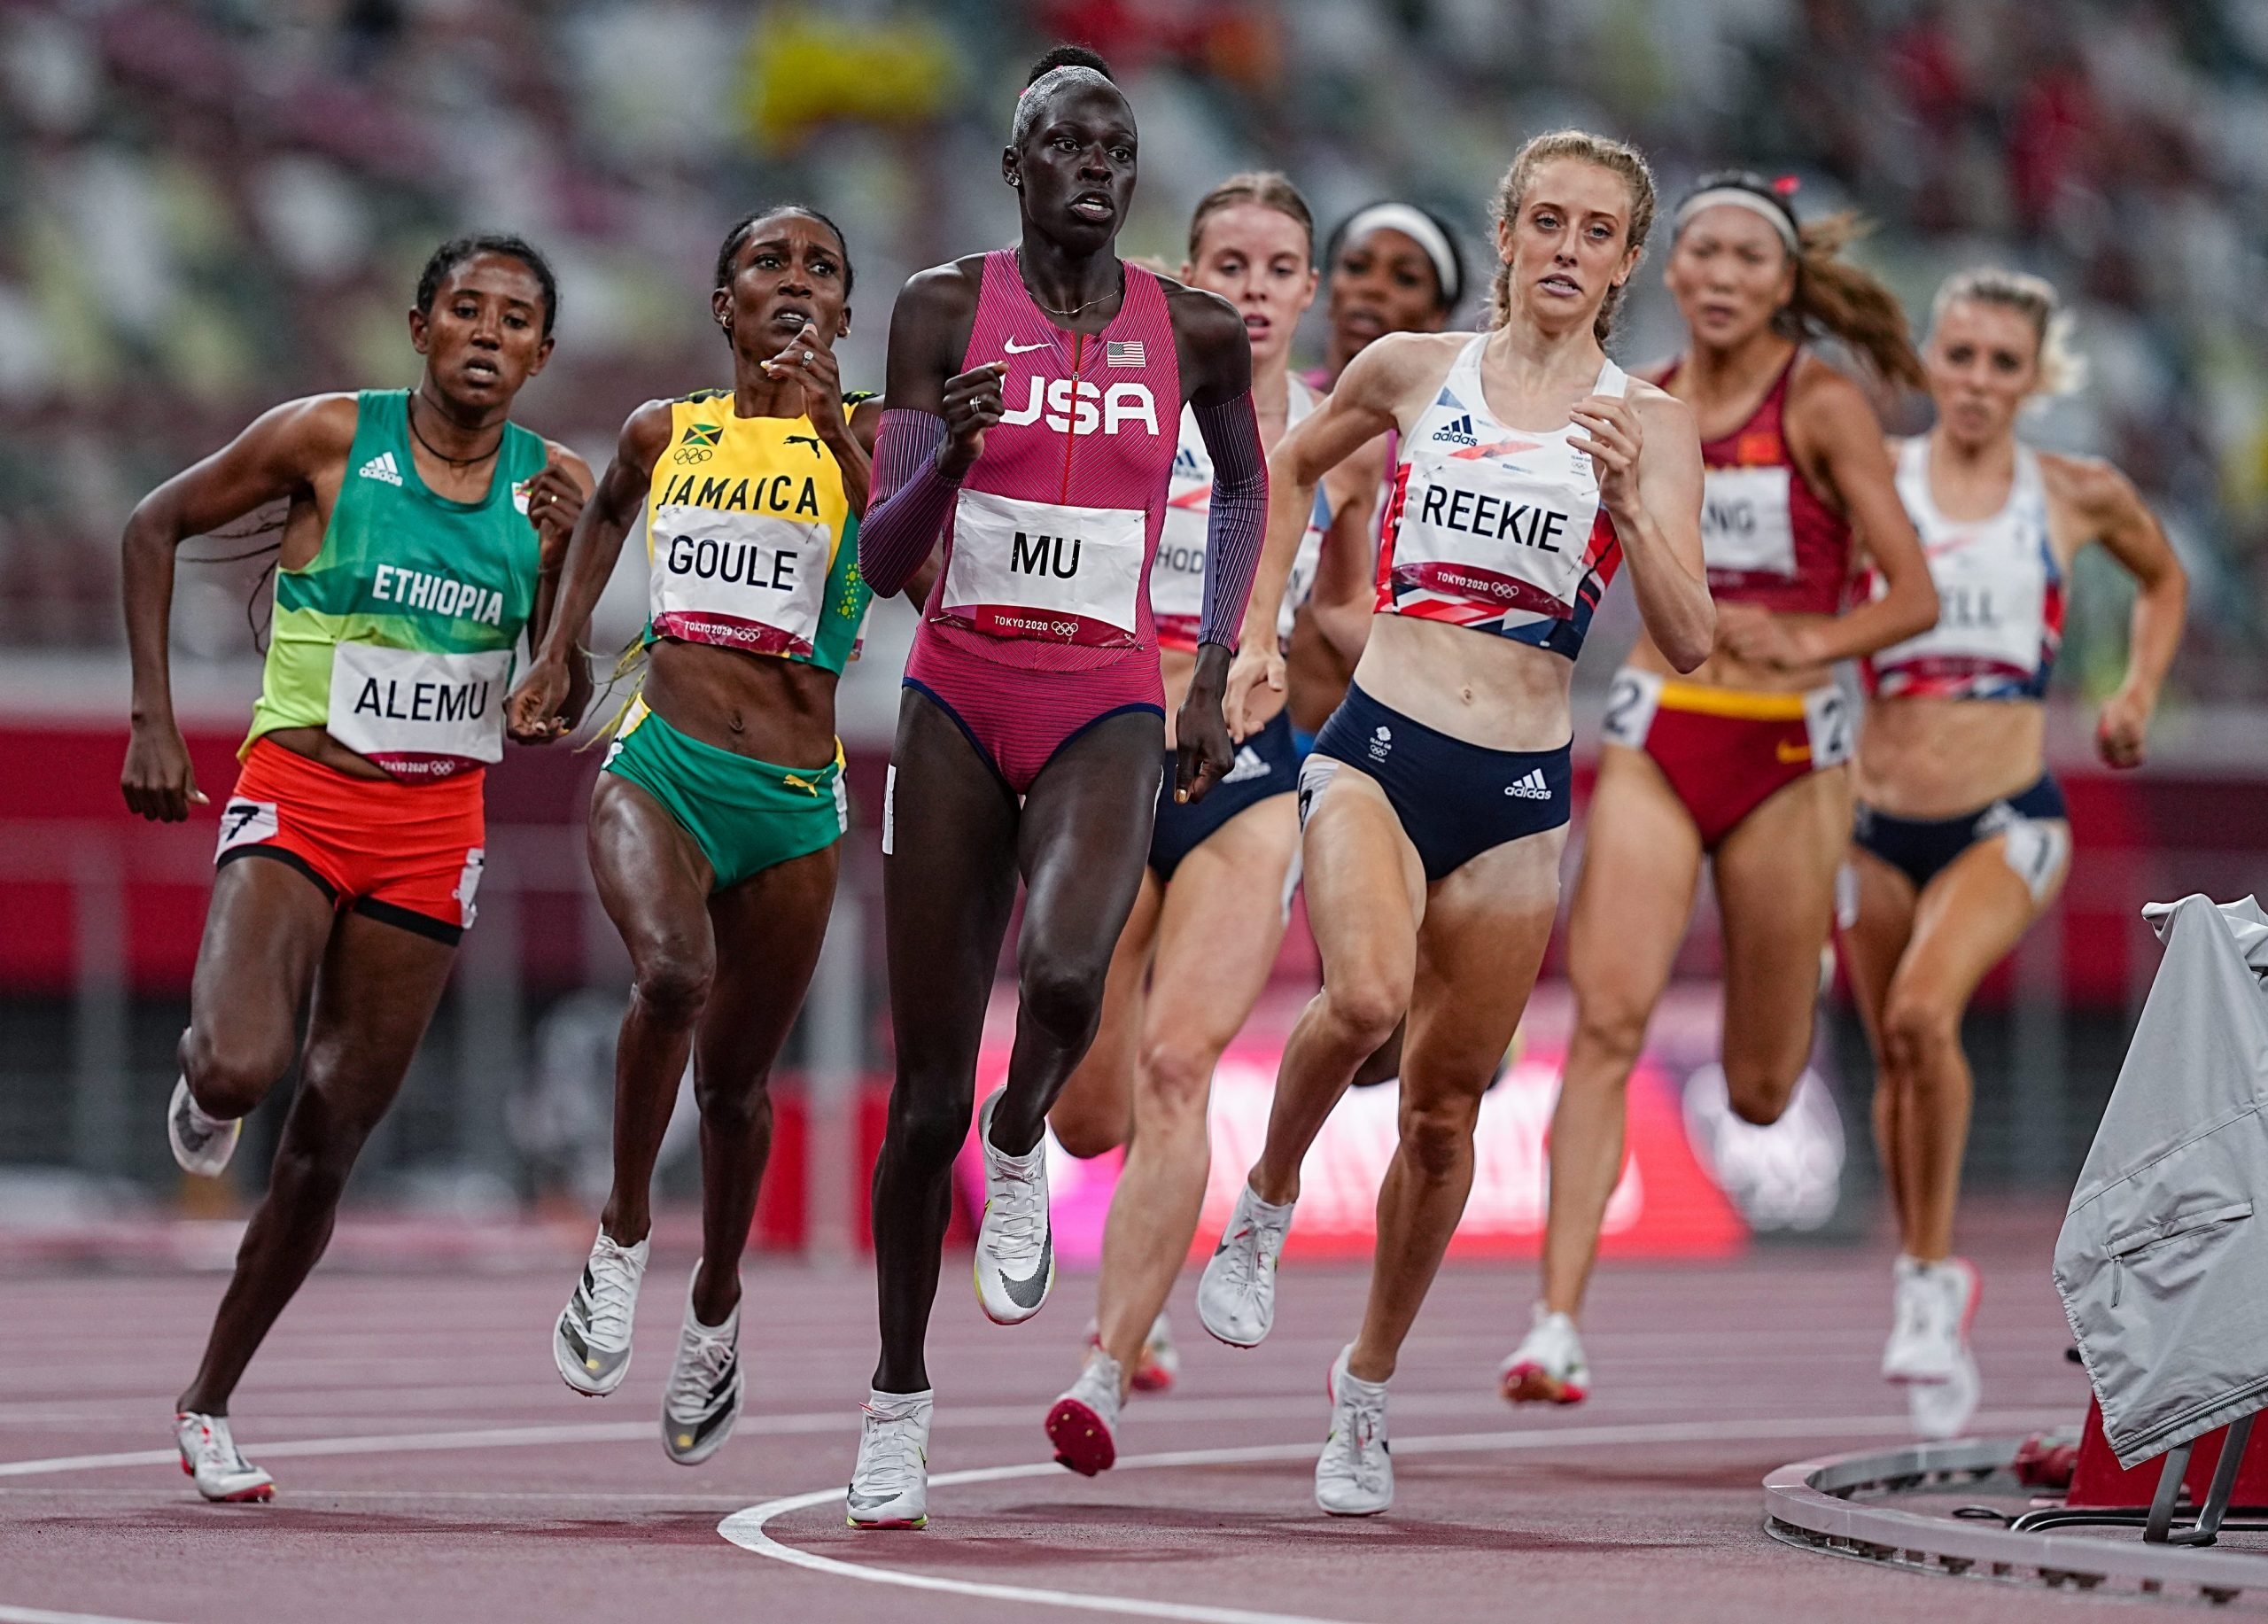 Runners Wearing Nike Super Shoes Dominated In The Olympics Taking More Than 60 Of Podium Spots